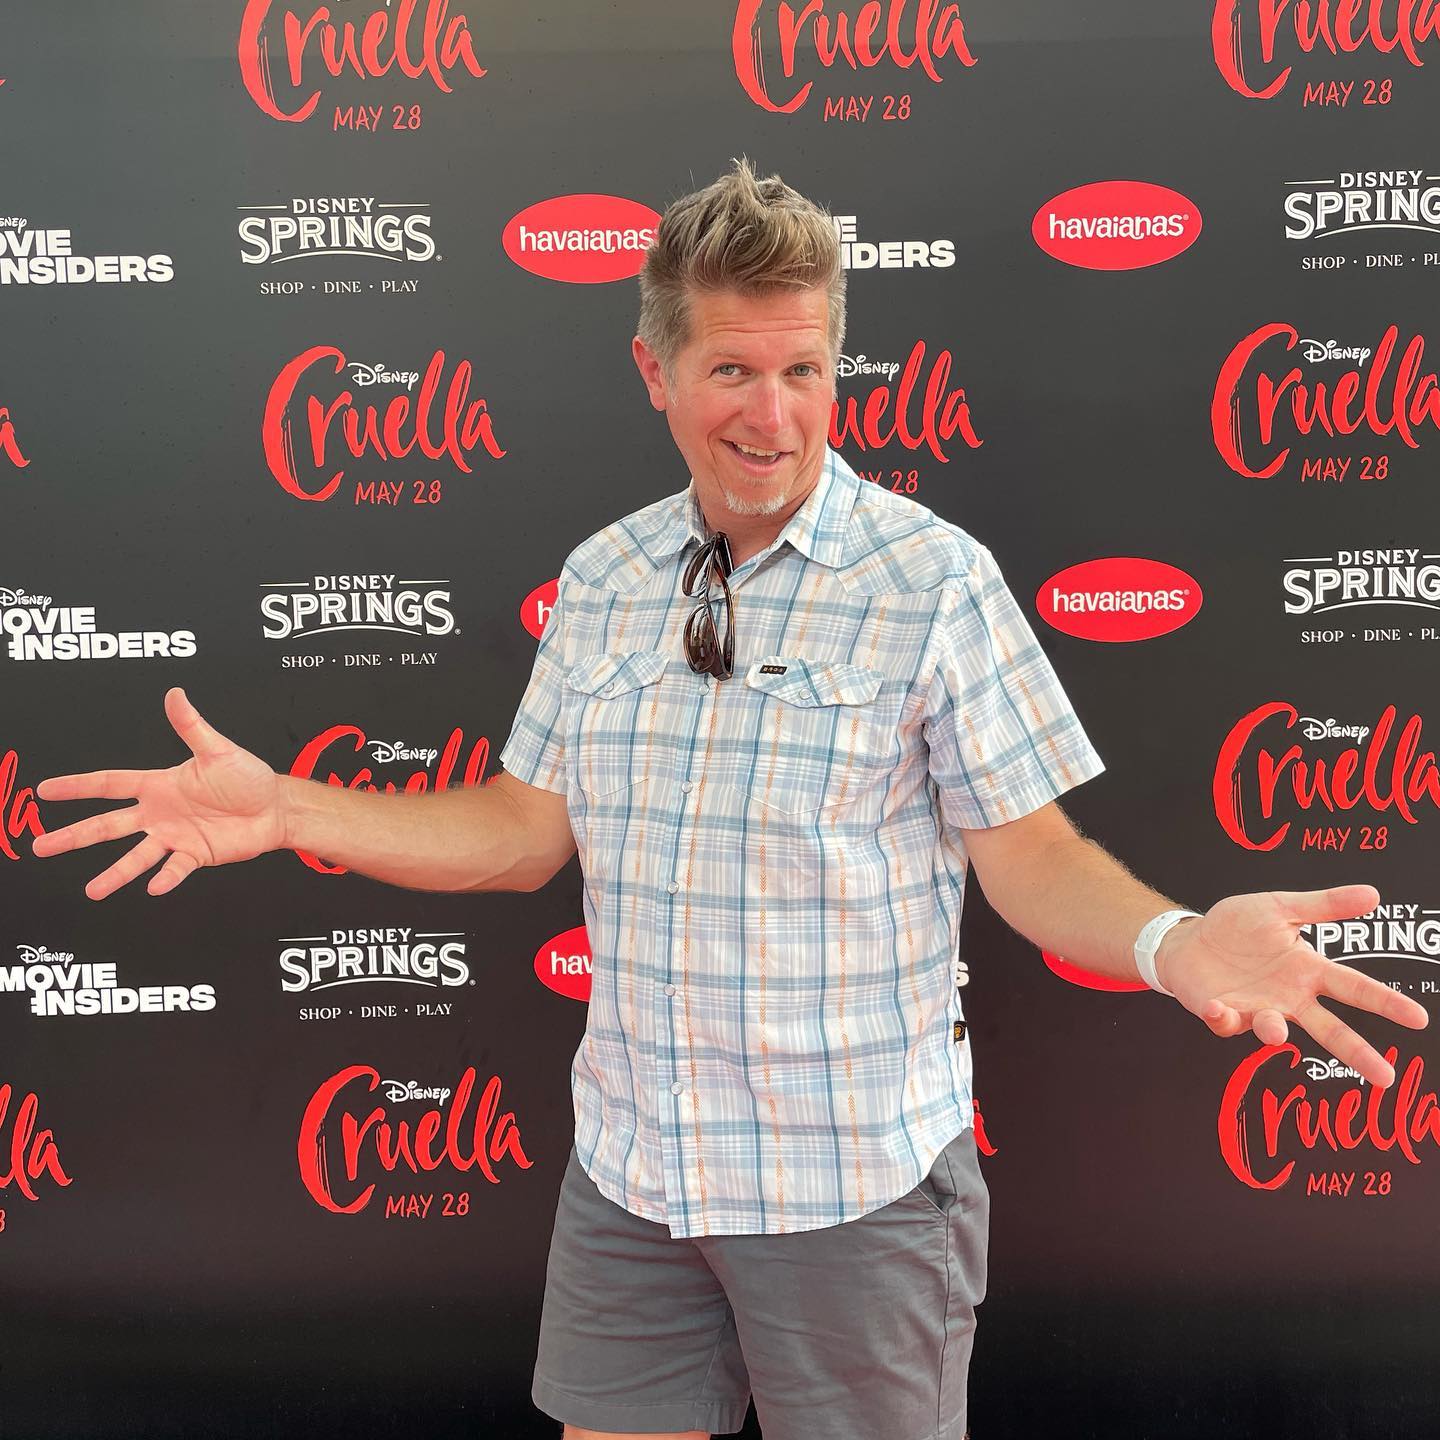 My son @sienarbucket and I had a little fun at the @disneycruella red carpet at @disneysprings yesterday.